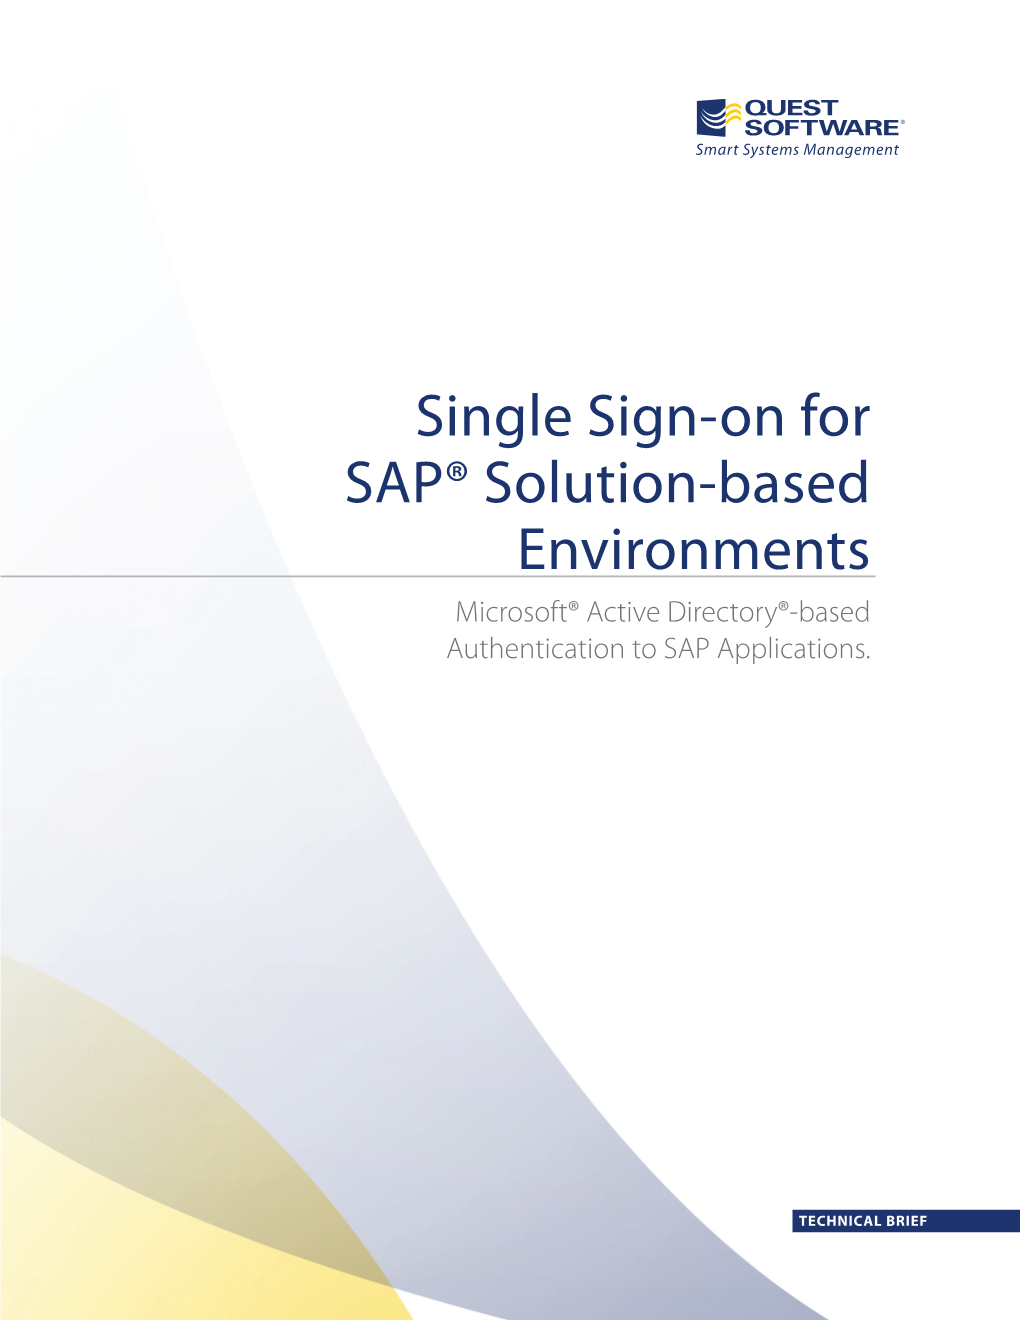 Single Sign-On for SAP® Solution-Based Environments Microsoft® Active Directory®-Based Authentication to SAP Applications